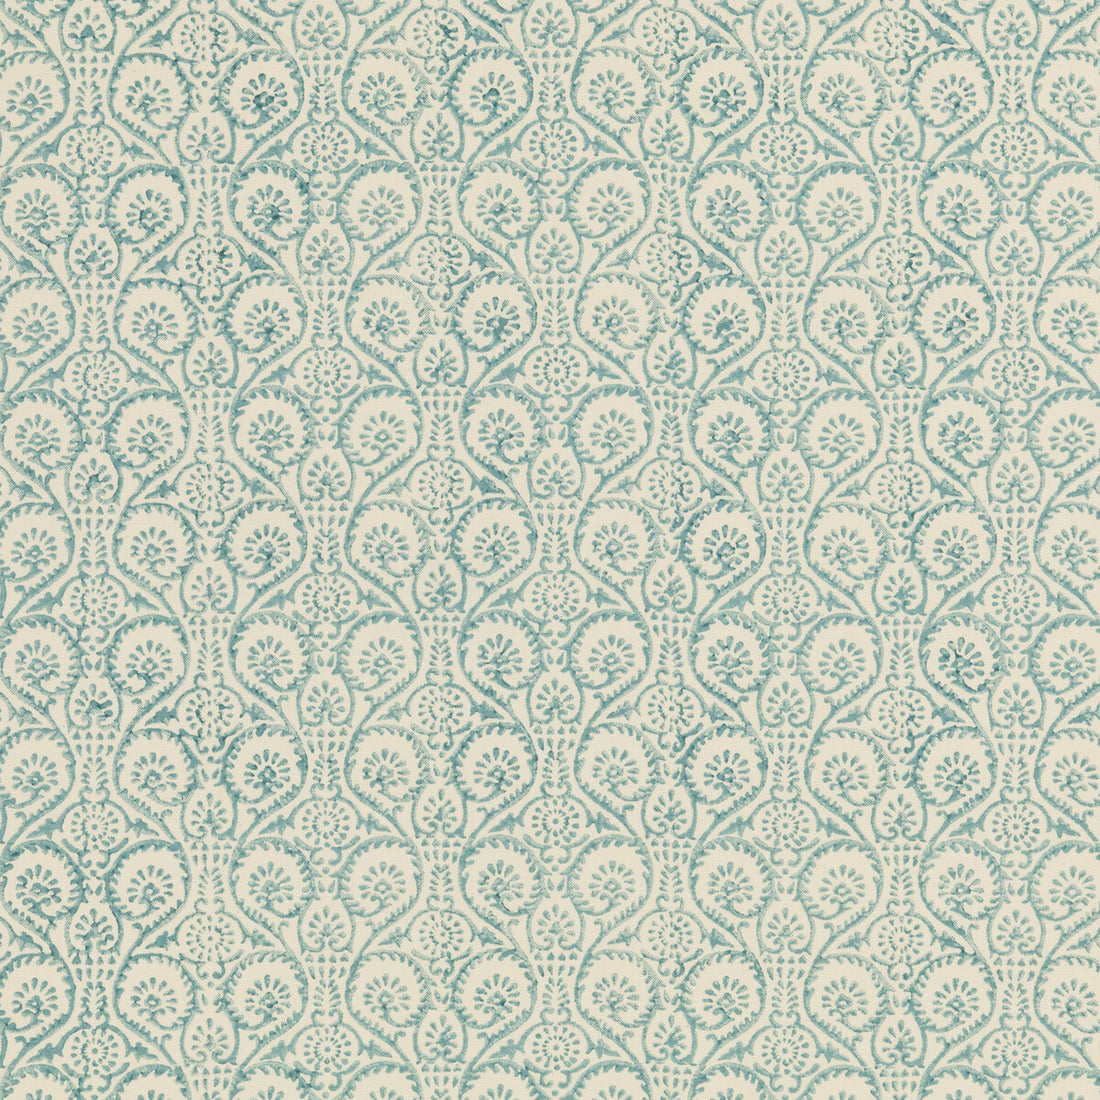 Pollen Trail fabric in aqua color - pattern PP50481.3.0 - by Baker Lifestyle in the Block Party collection